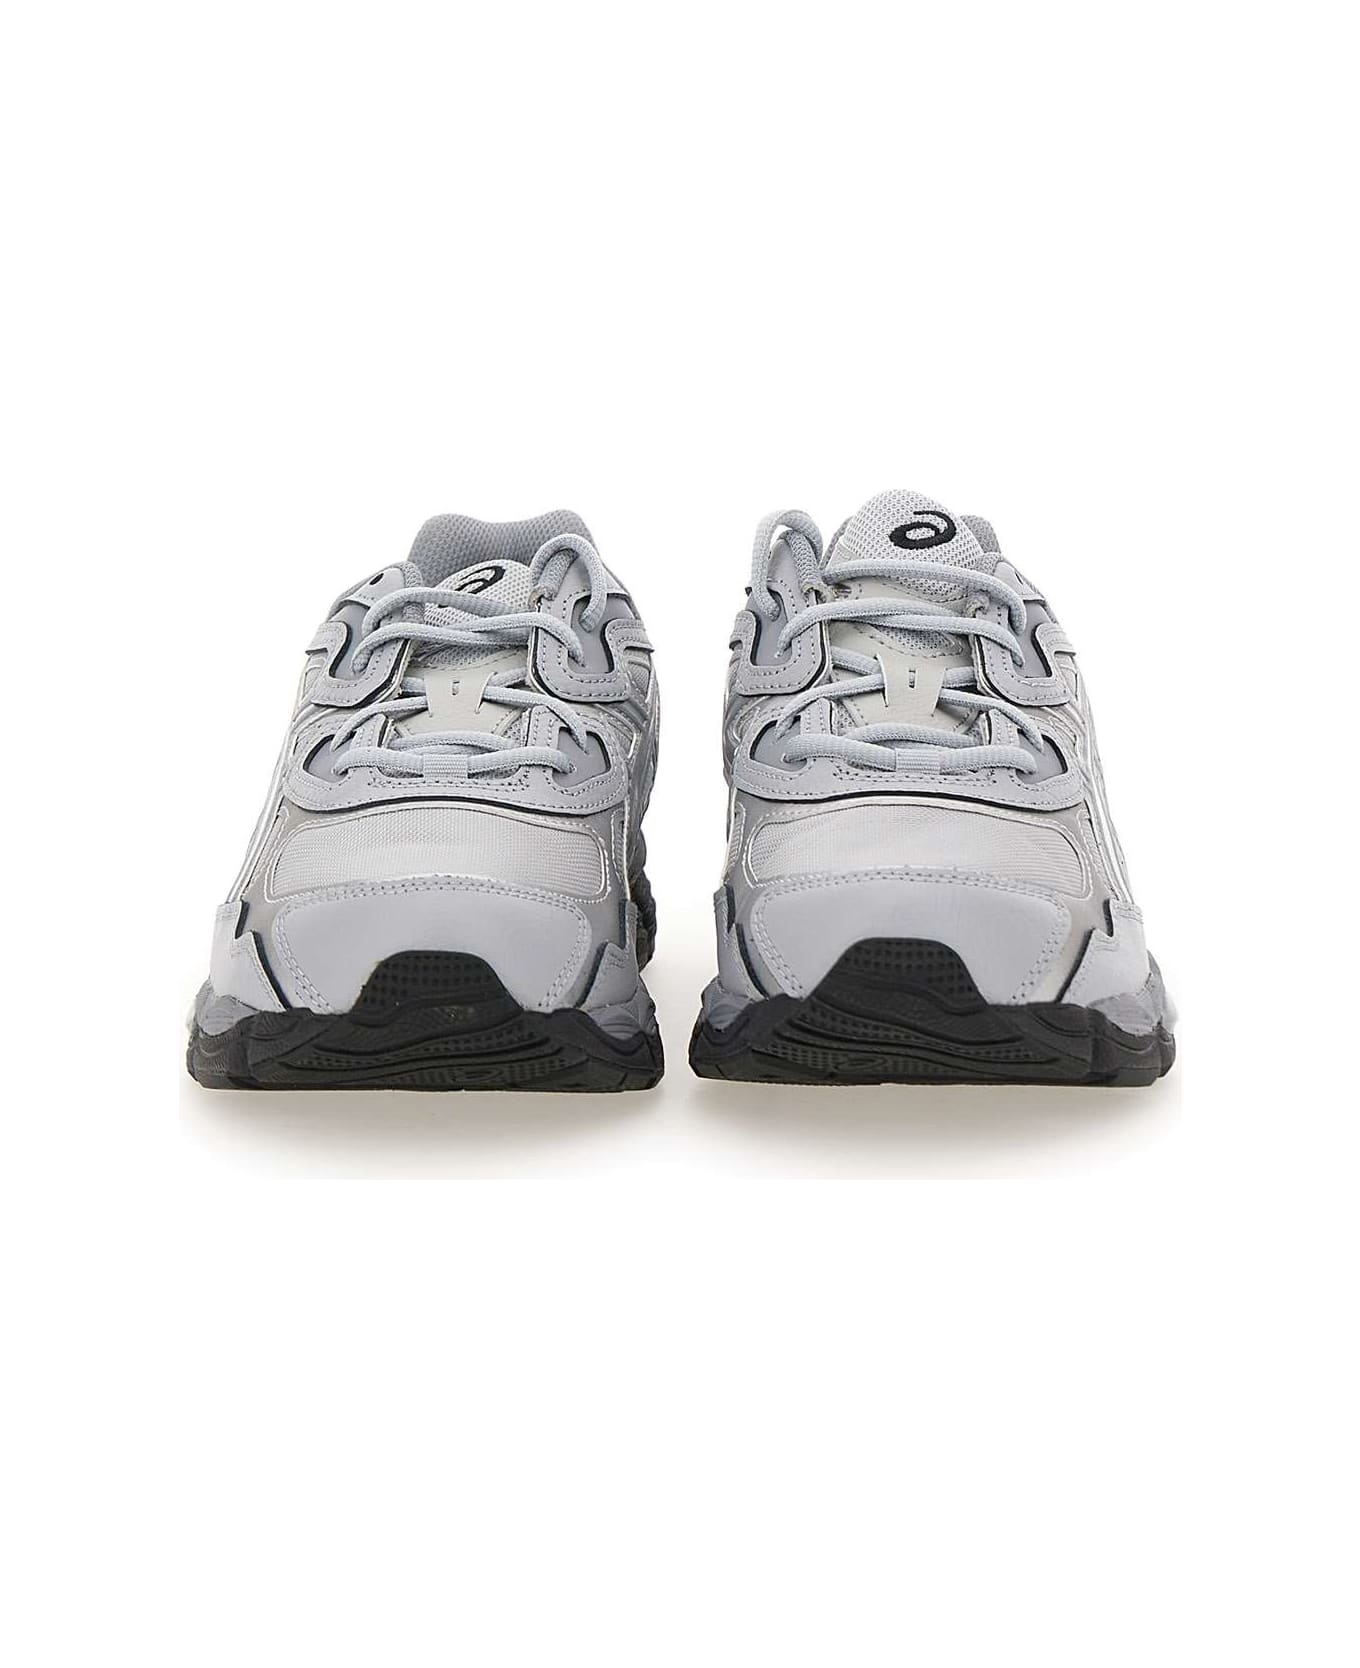 Asics "gel Nyc" Leather Sneakers - GREY